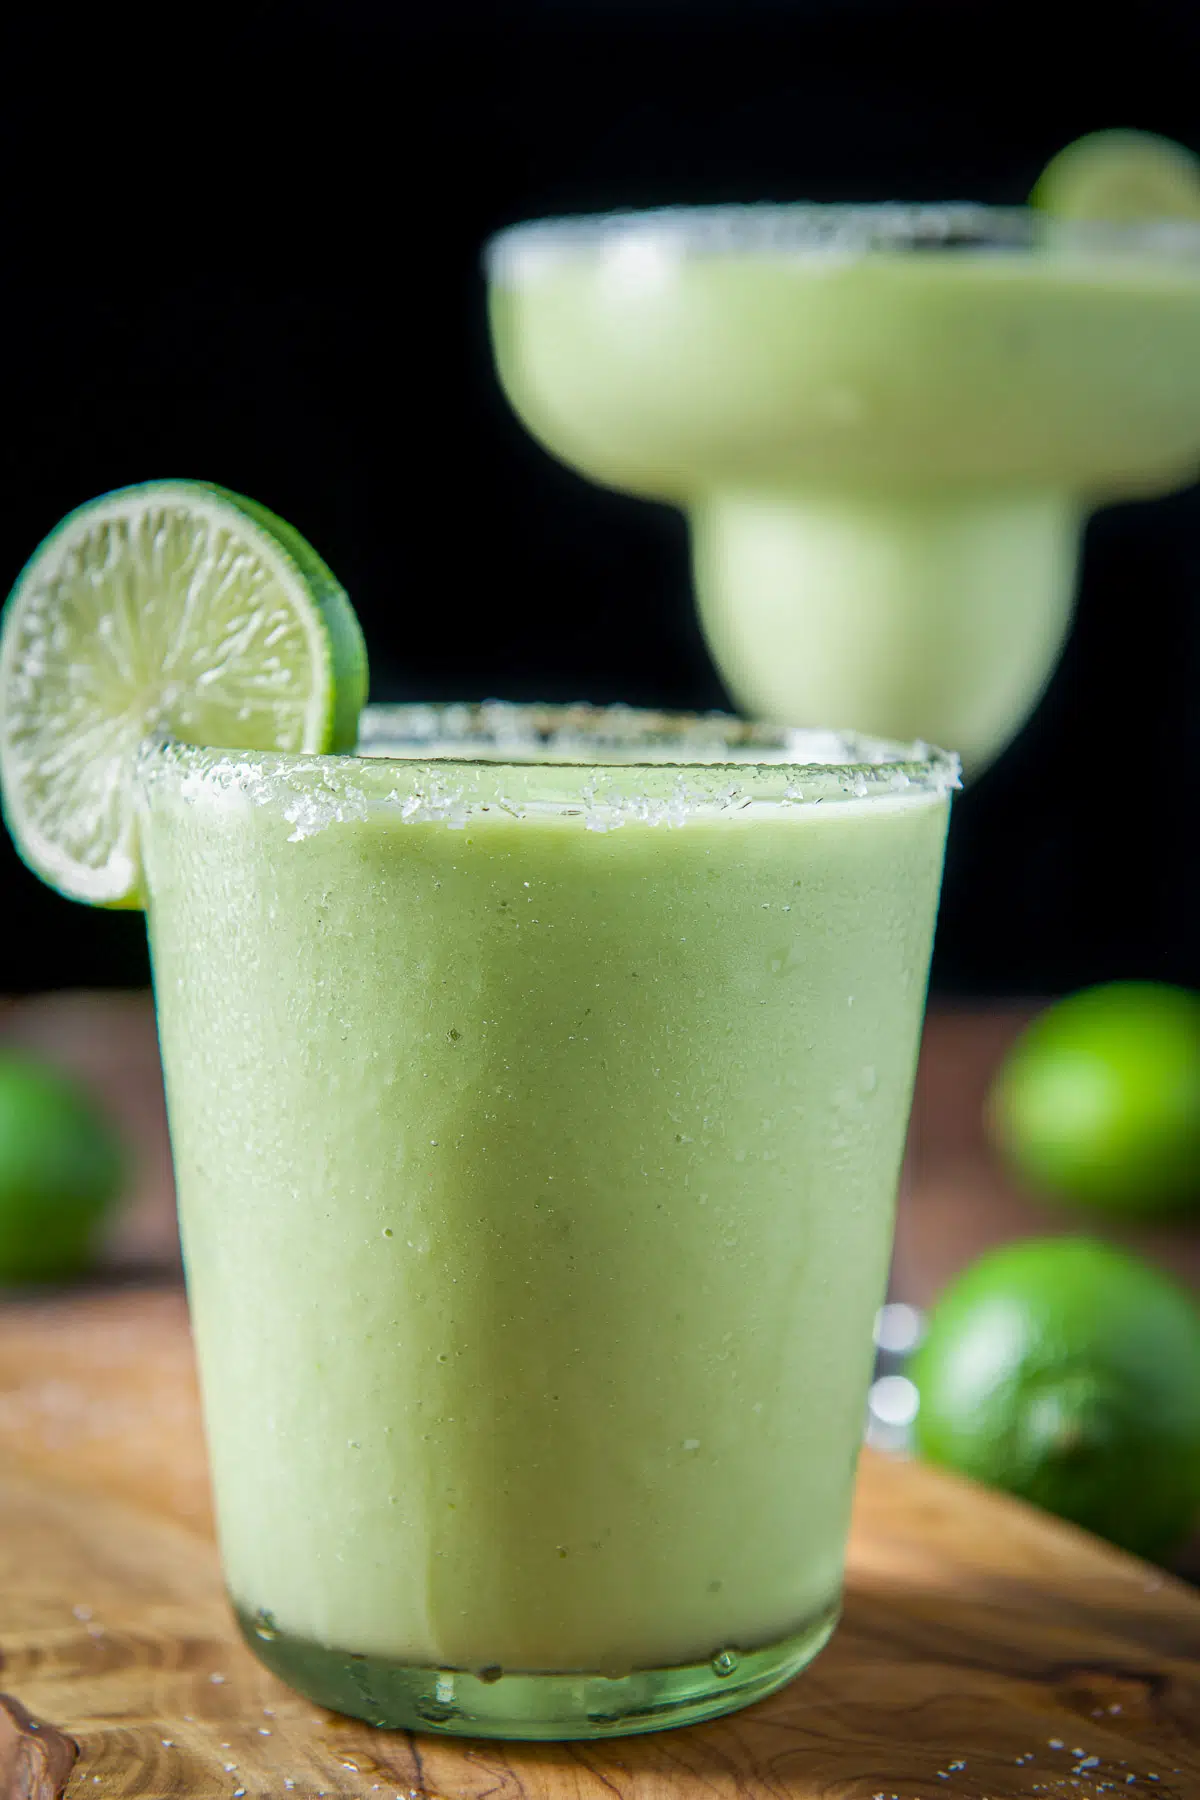 Vertical view of a short glass with the avocado margarita in it with salt and lime wheels on the rim